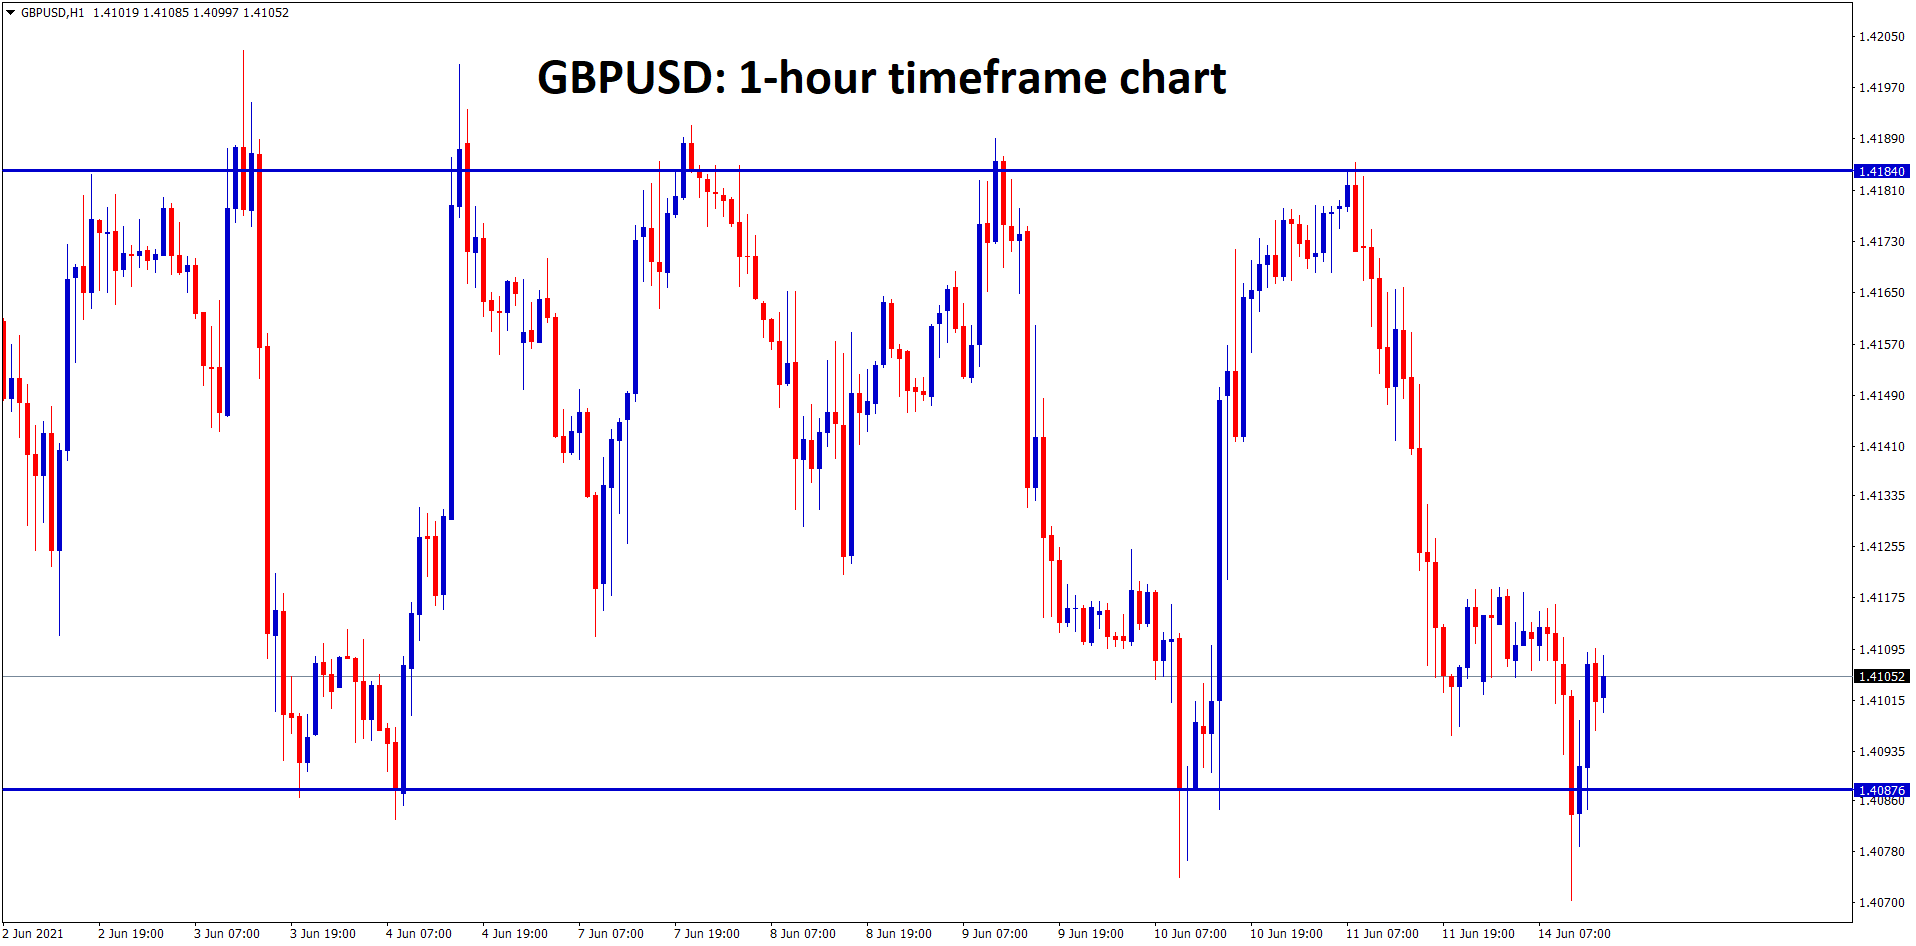 GBPUSD is moving up and down between the Resistance and Support lines